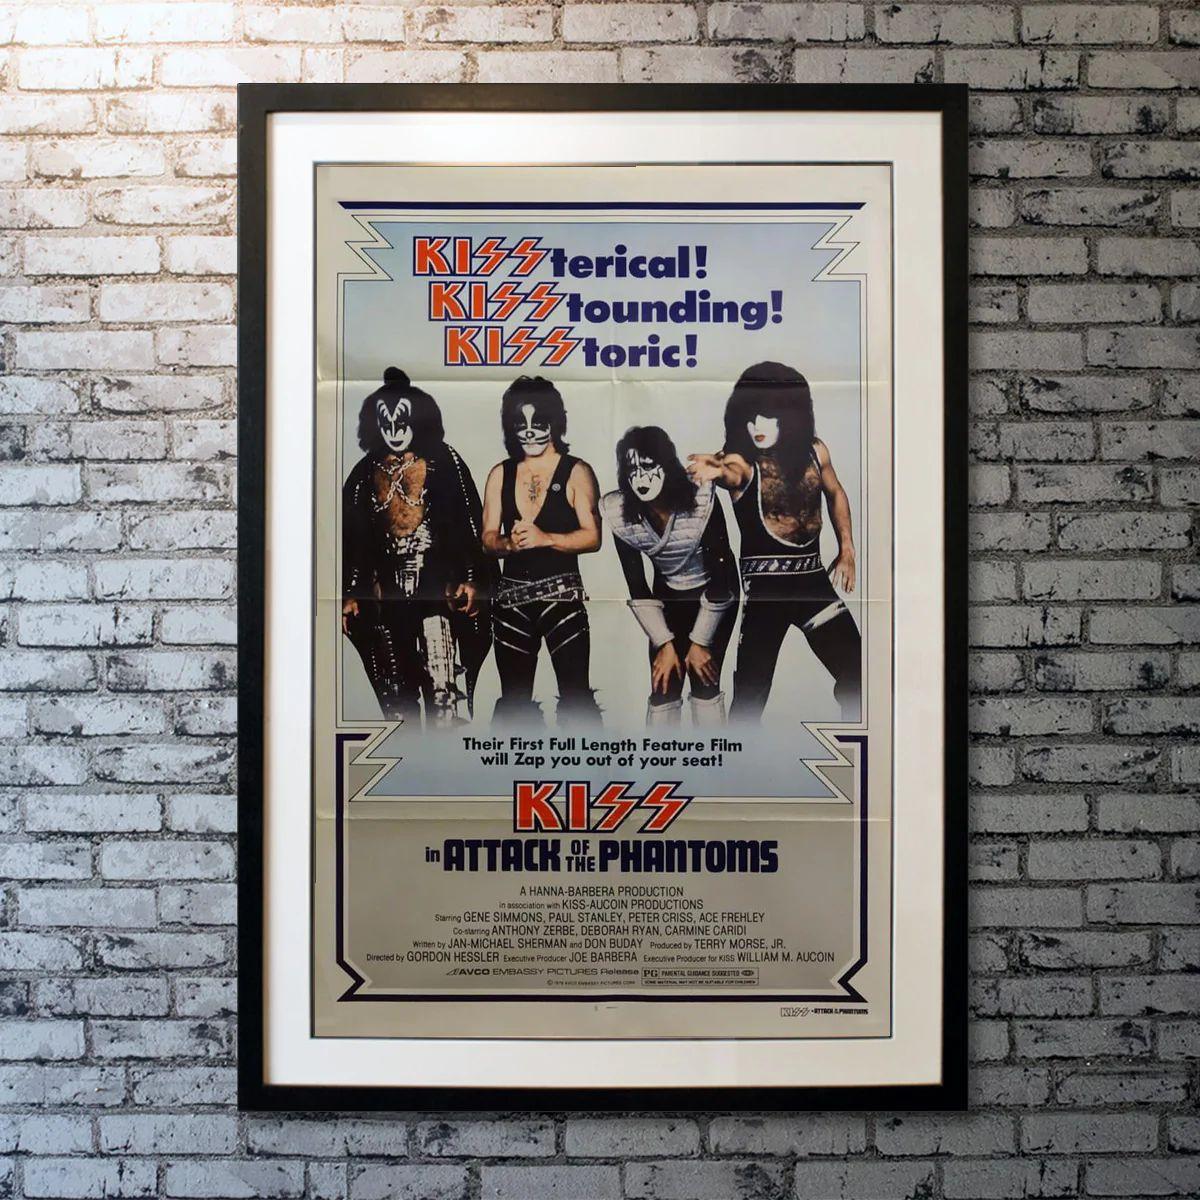 KISS in Attack OF THE Phantoms, Unframed Poster, 1978

KISS, a rock band made up of superheroes, battles an evil inventor who has plans for destruction at a California amusement park.

Year: 1978
Nationality: United States
Condition: